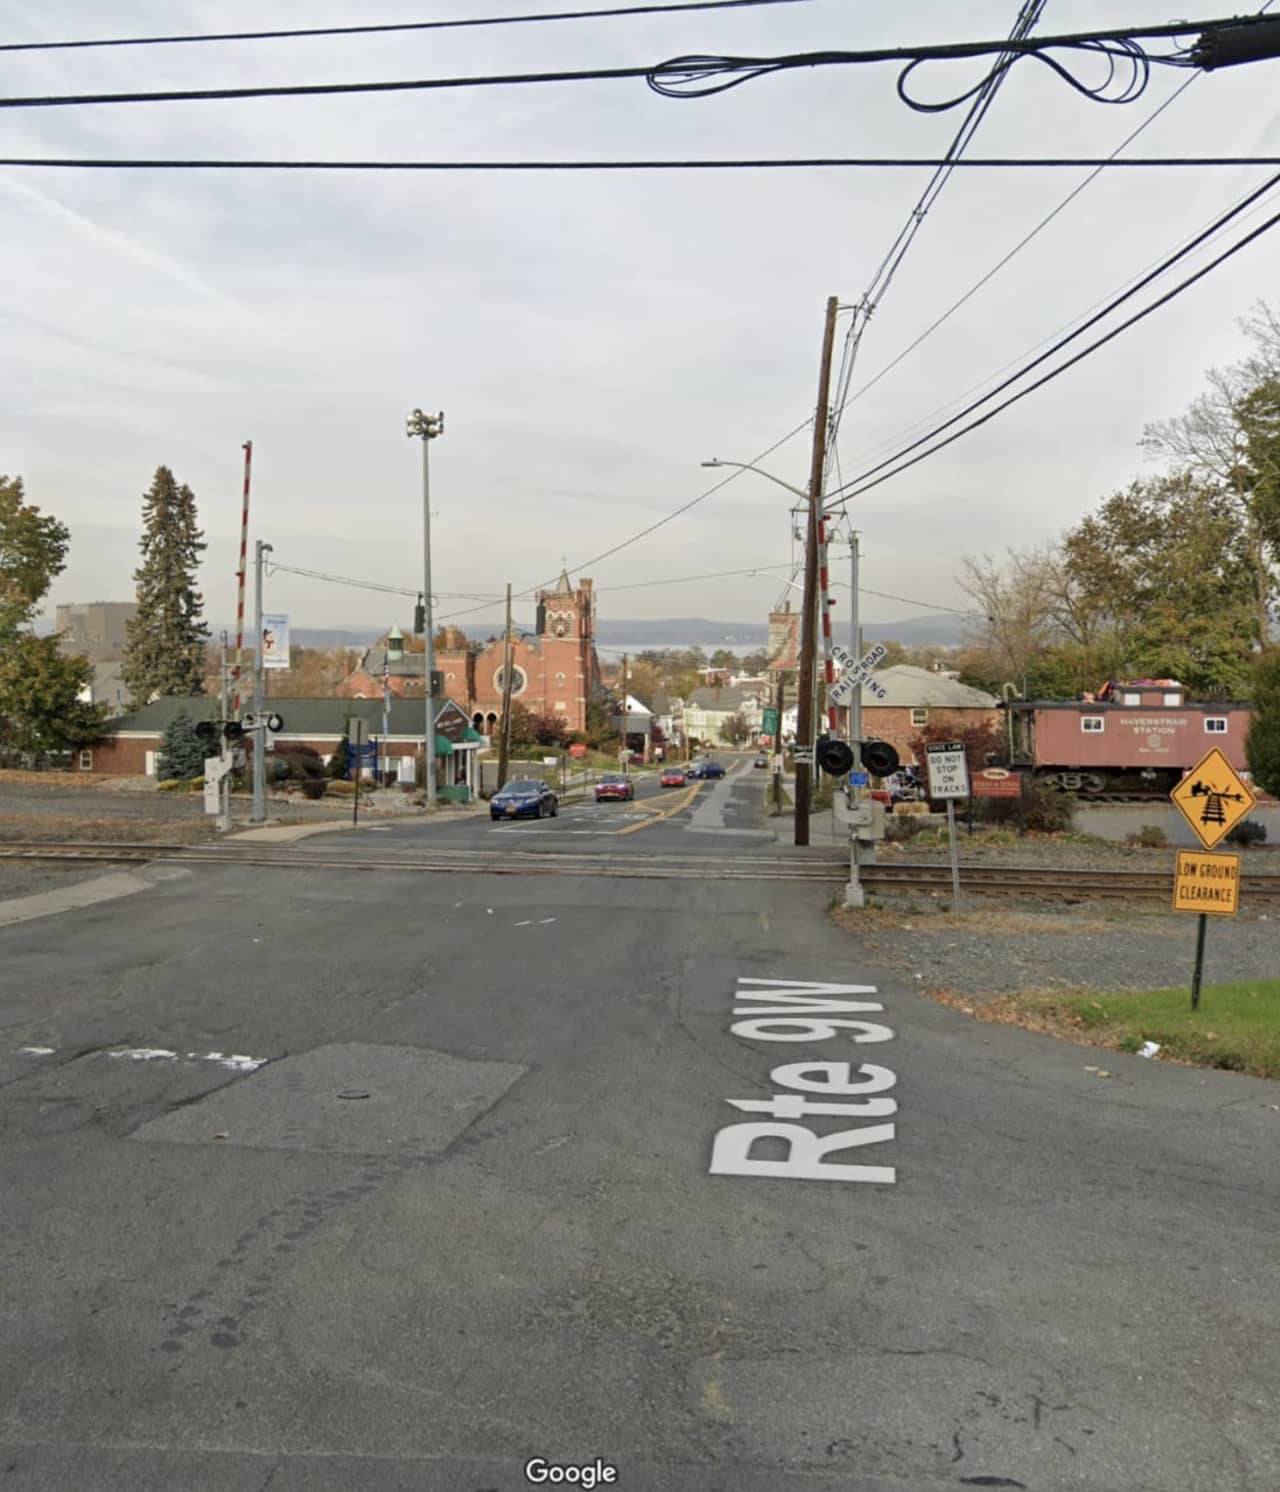 The man was struck on Route 9W in Haverstraw